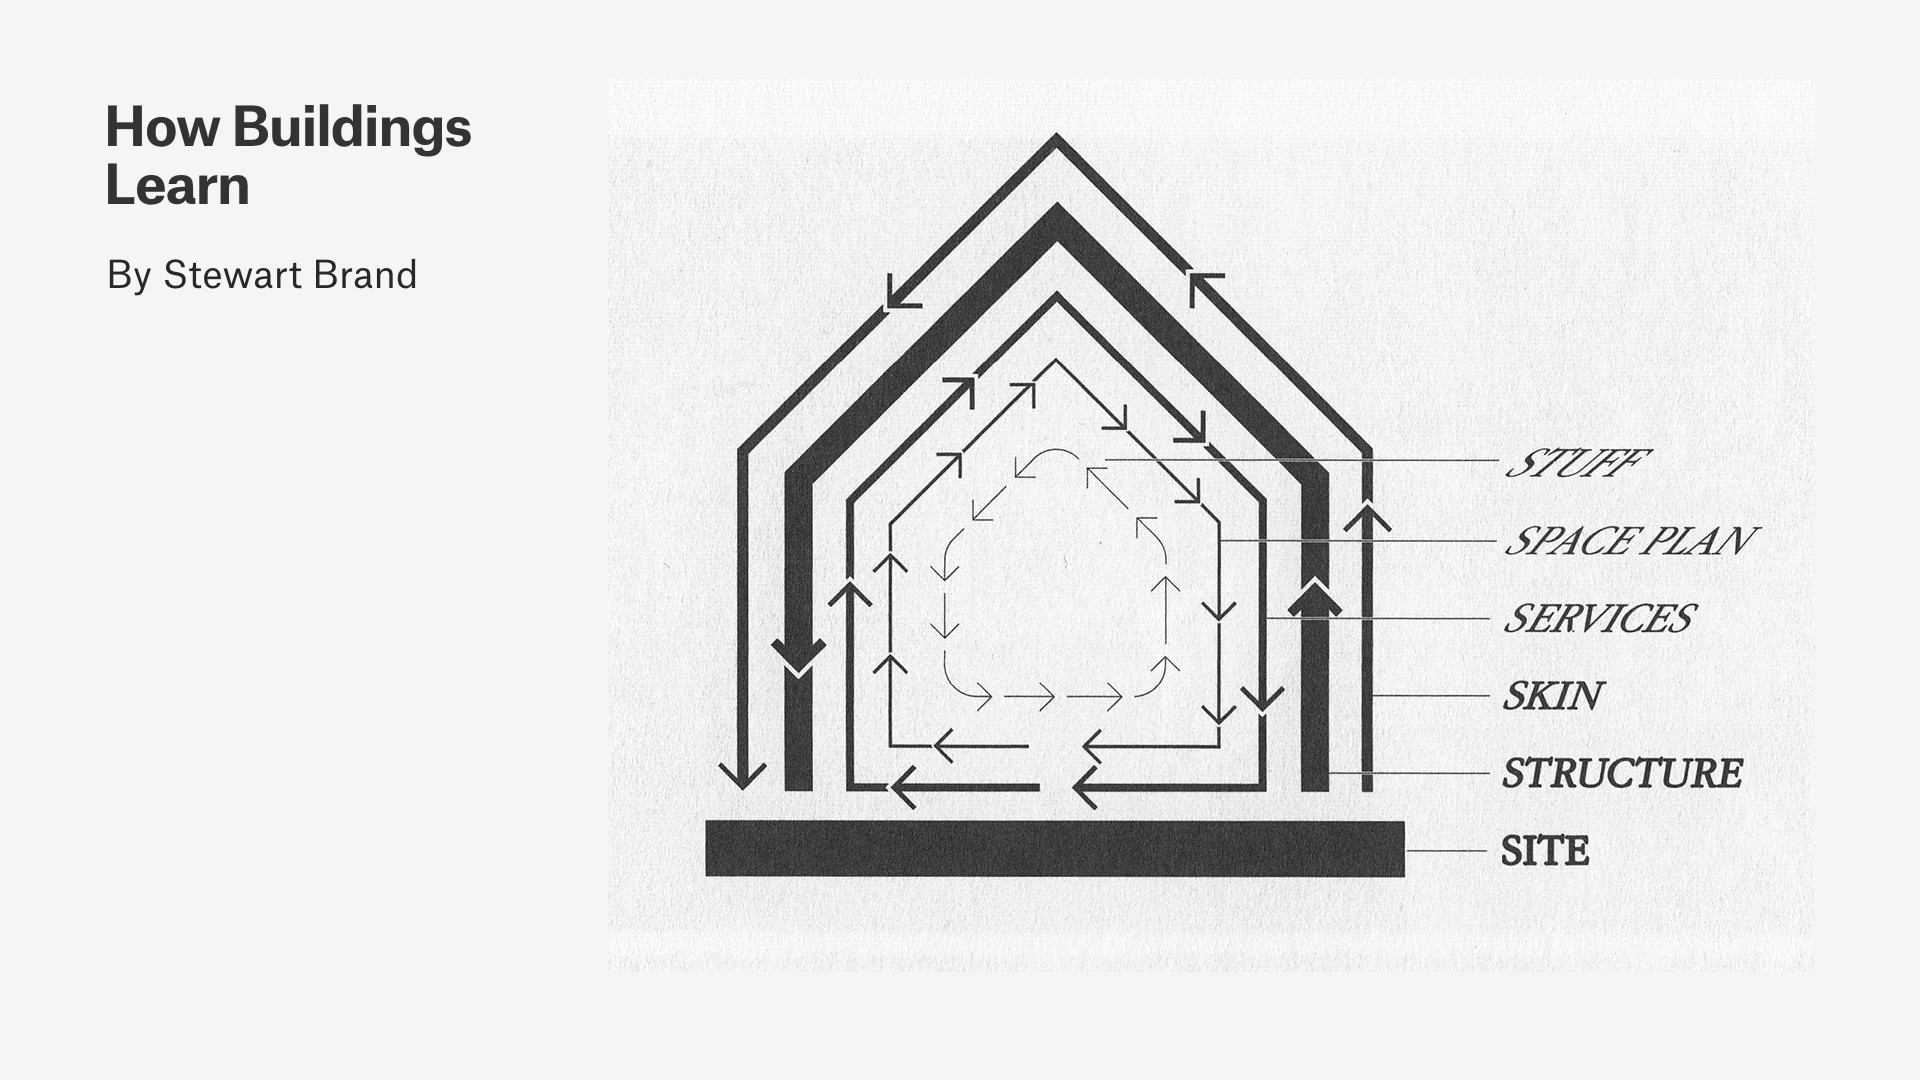 Diagram from Steward Brand's 'How Buildings Learn' that showcases layers to buildings.